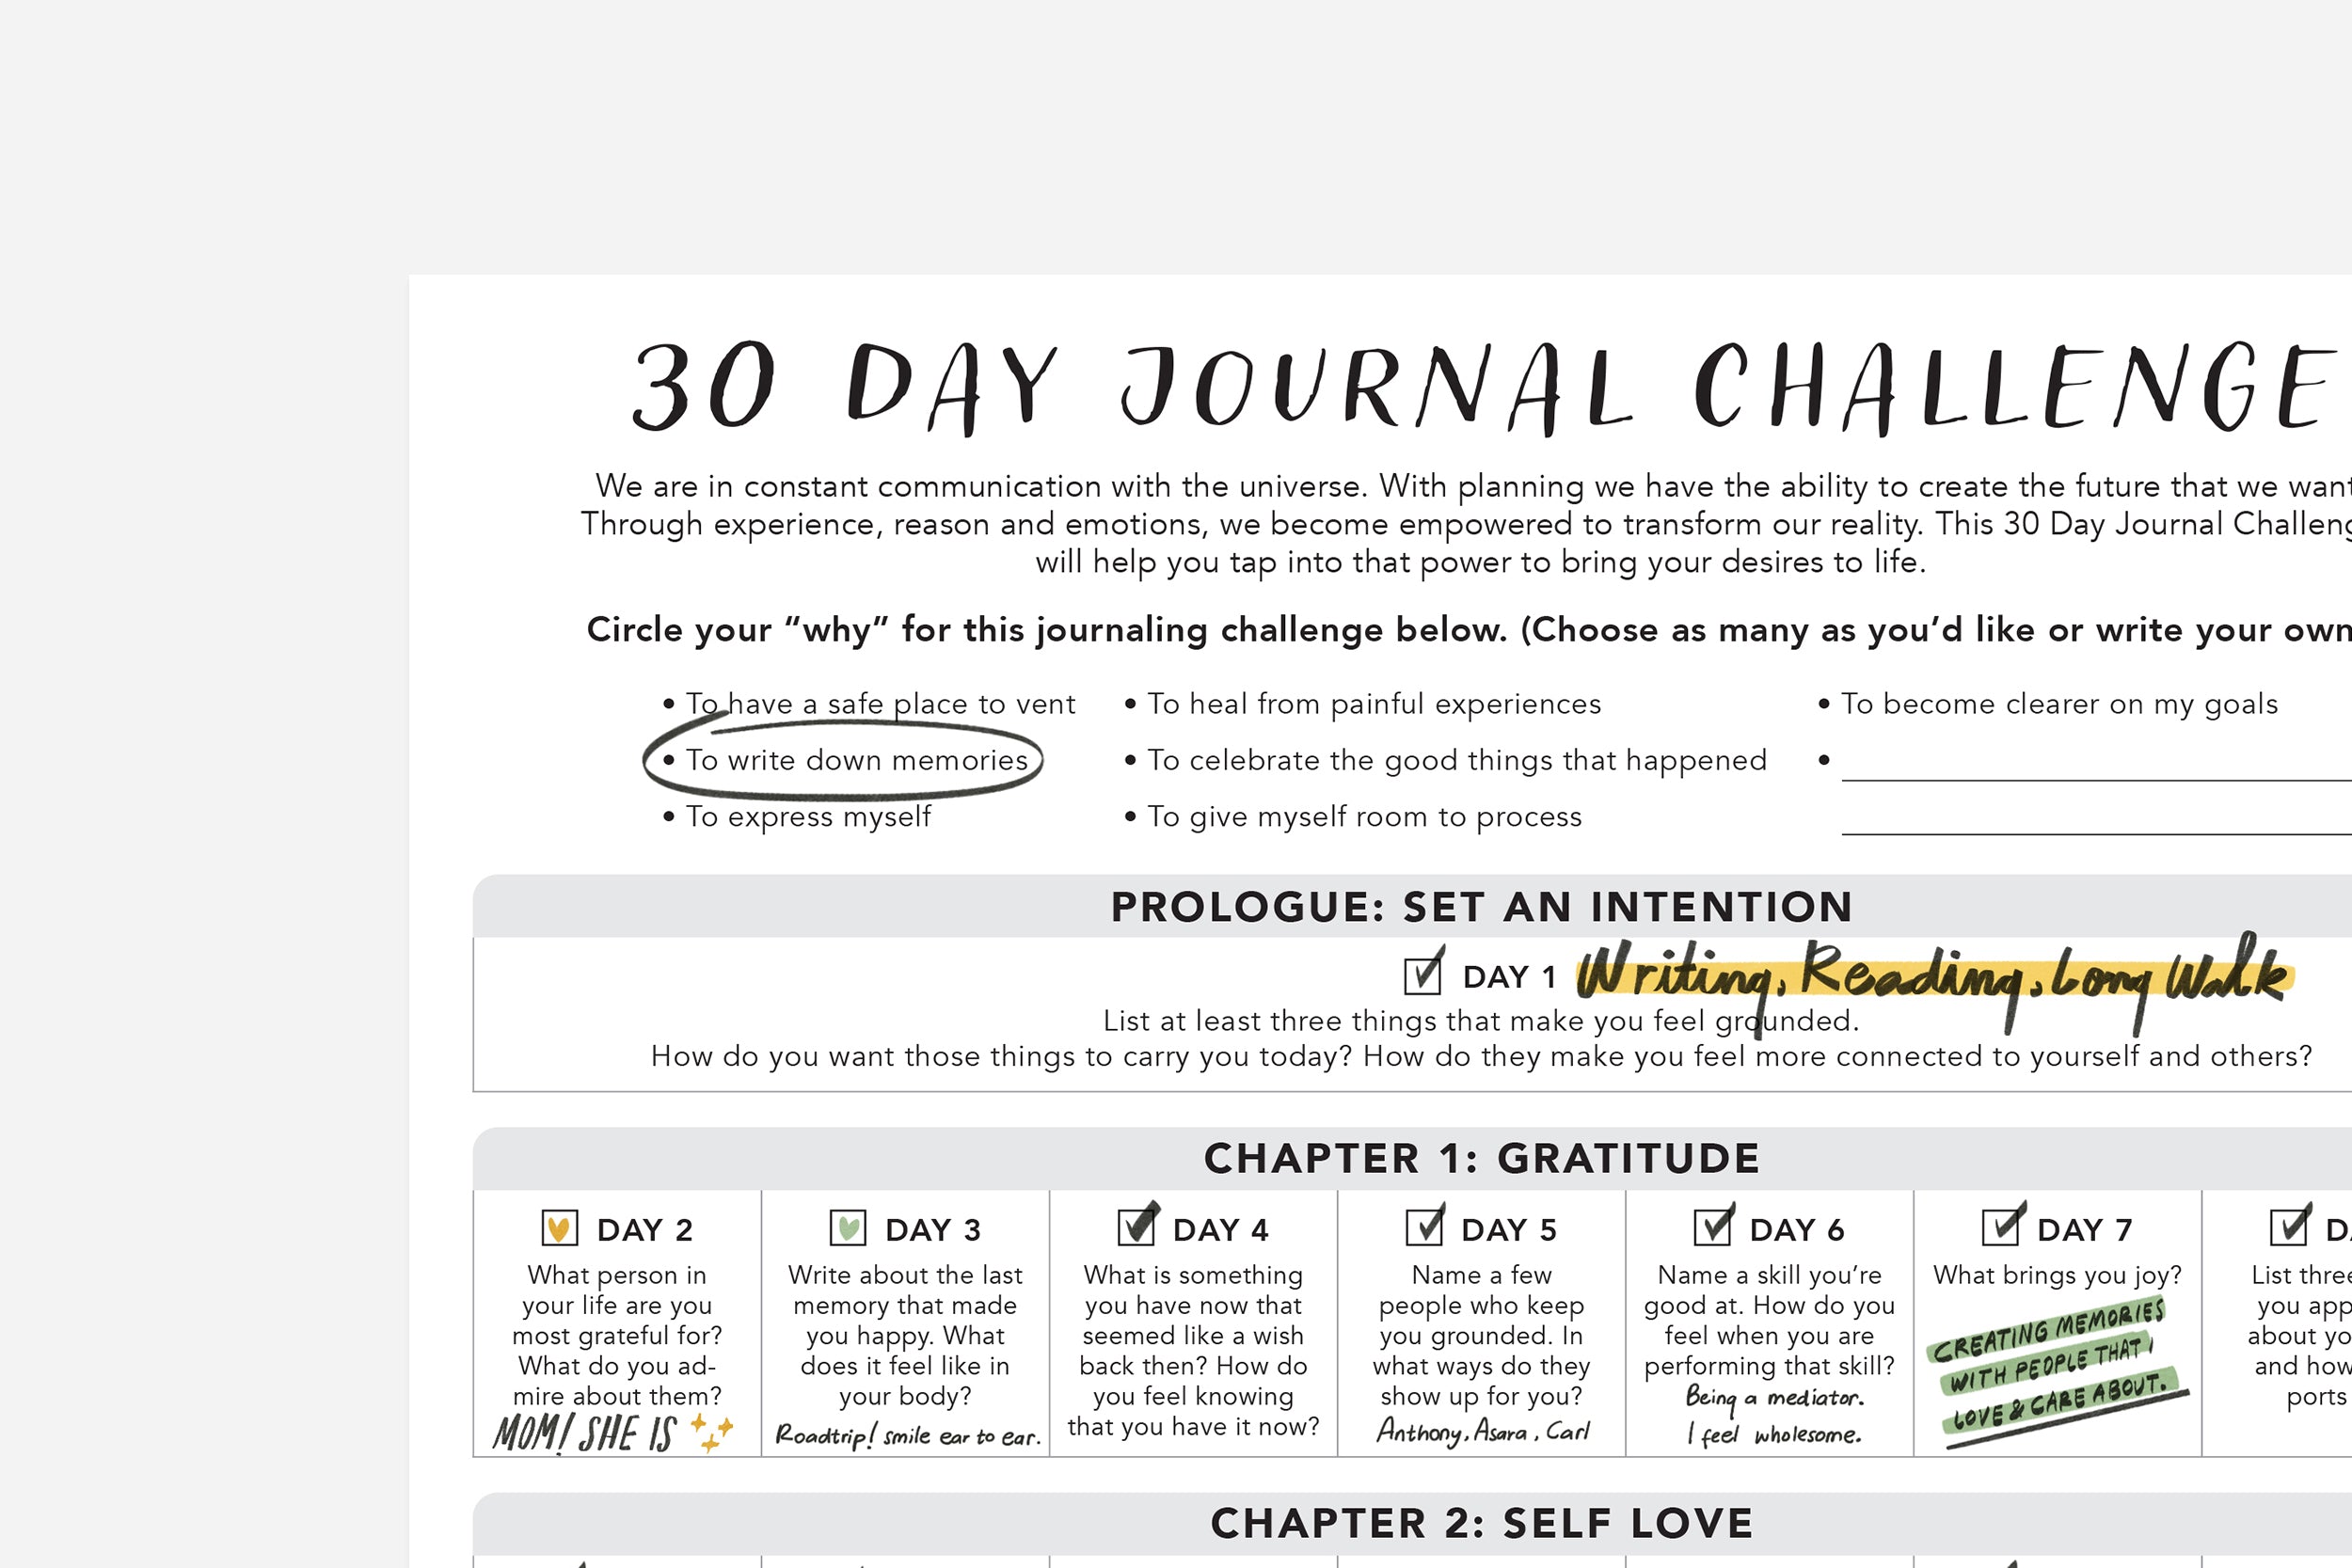 30 Day Journal Challenge - Passion Planner